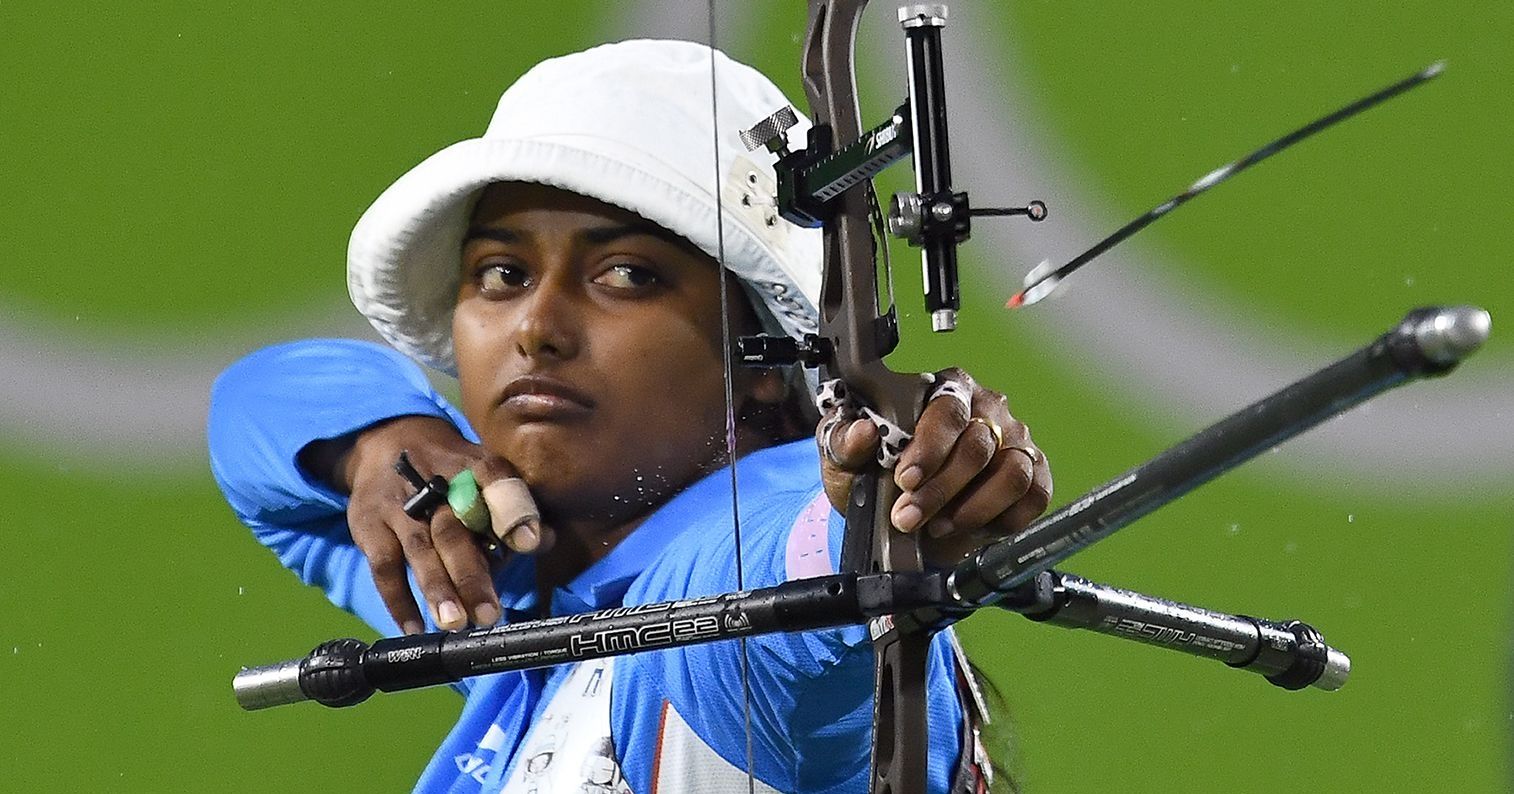 India's Deepika Kumari Outplays Opponent In ShootOff To Win Bronze At